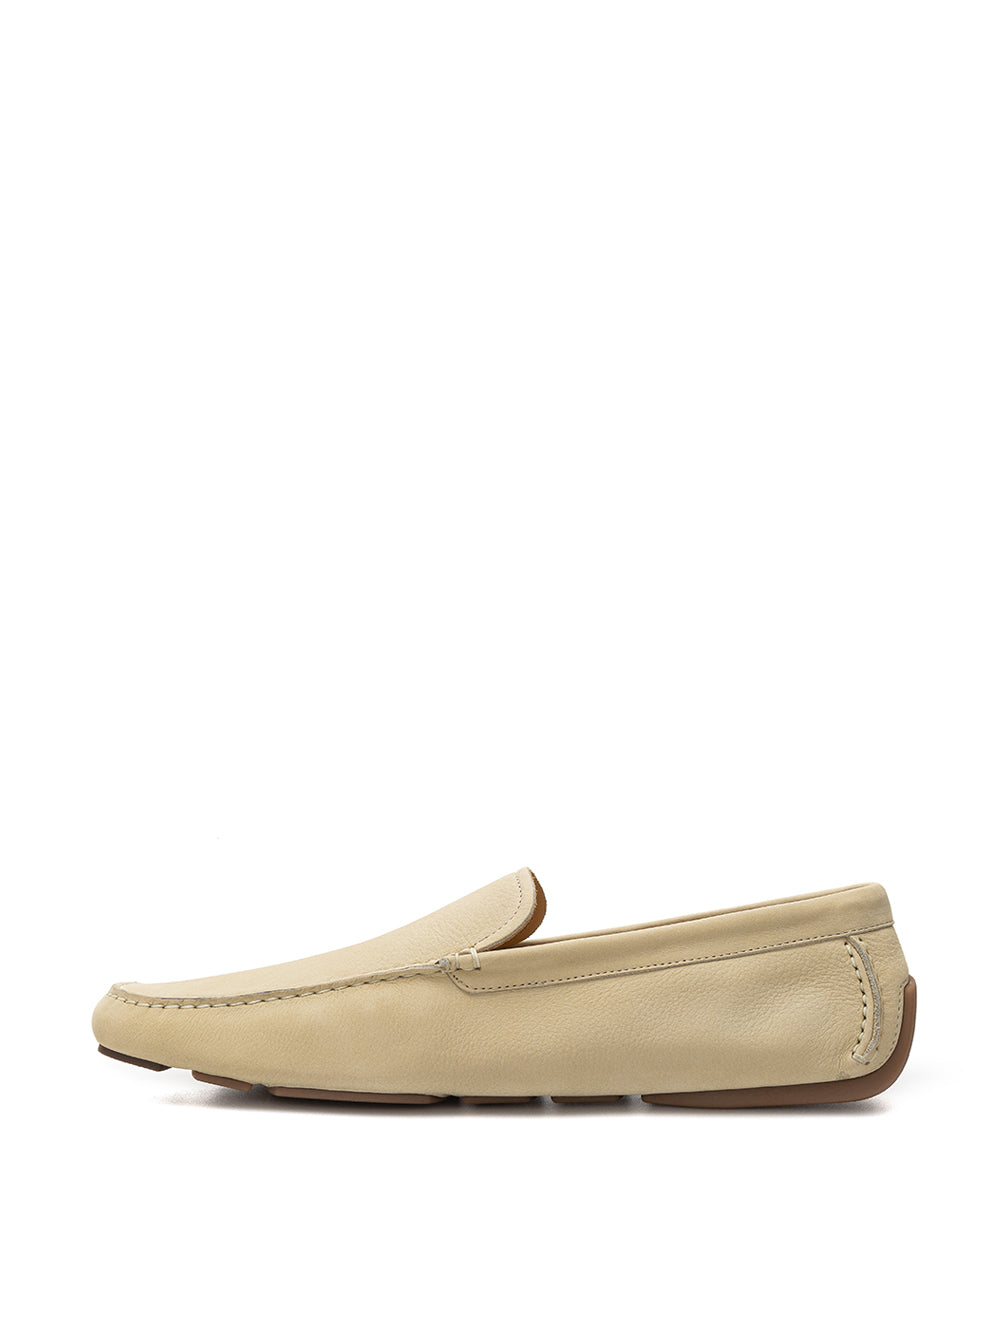 Bally beige suede moccasin